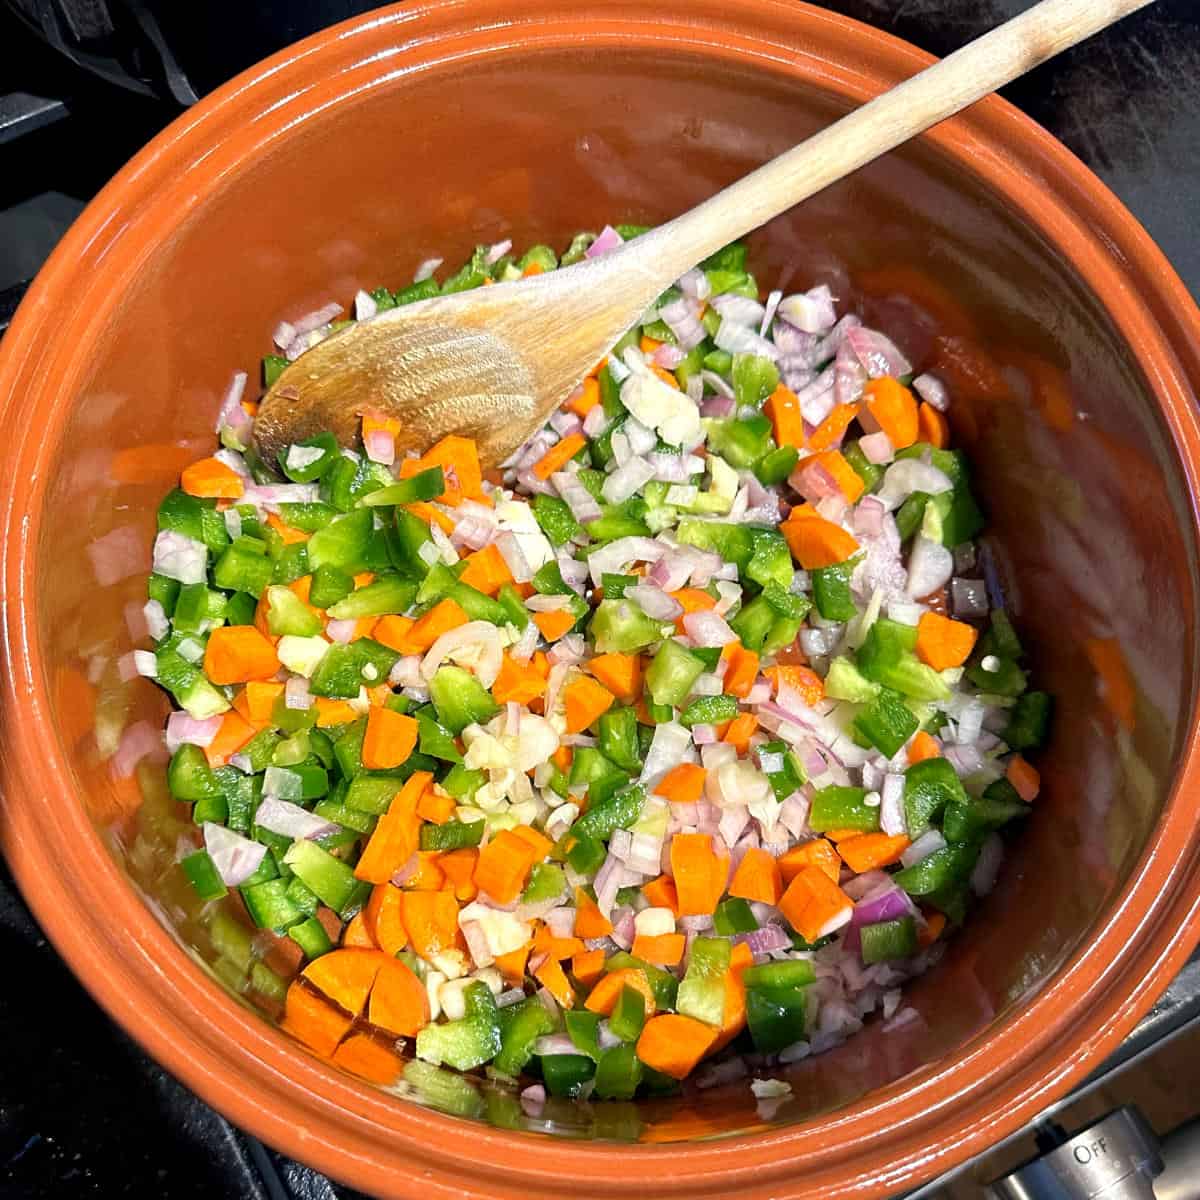 Carrots, onions and bell peppers in pot with onions.